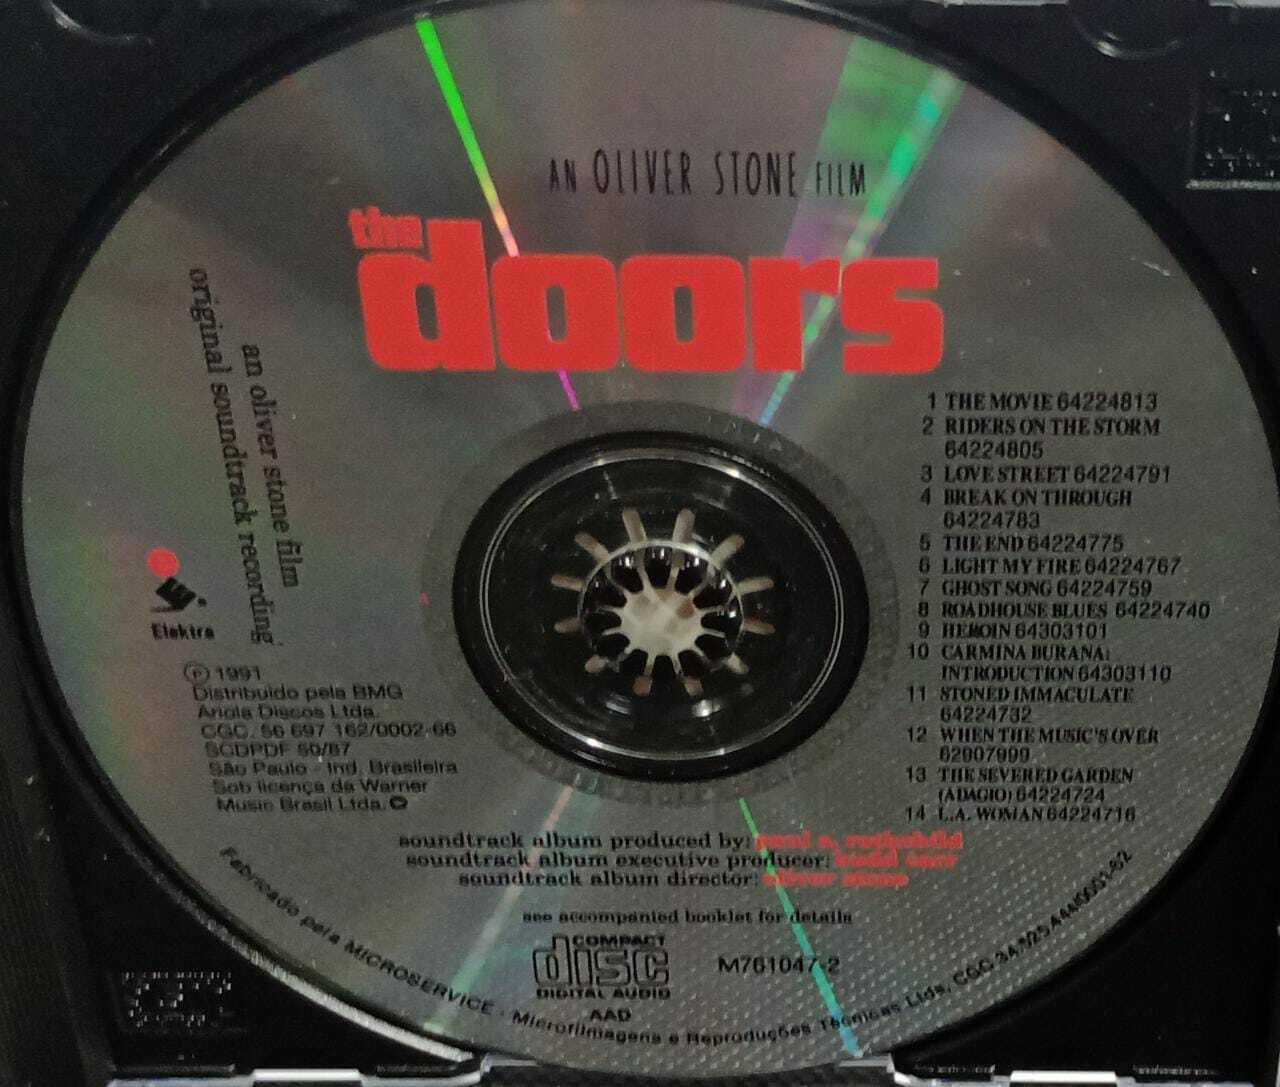 CD - Doors the - Oliver Stone Soundtrack